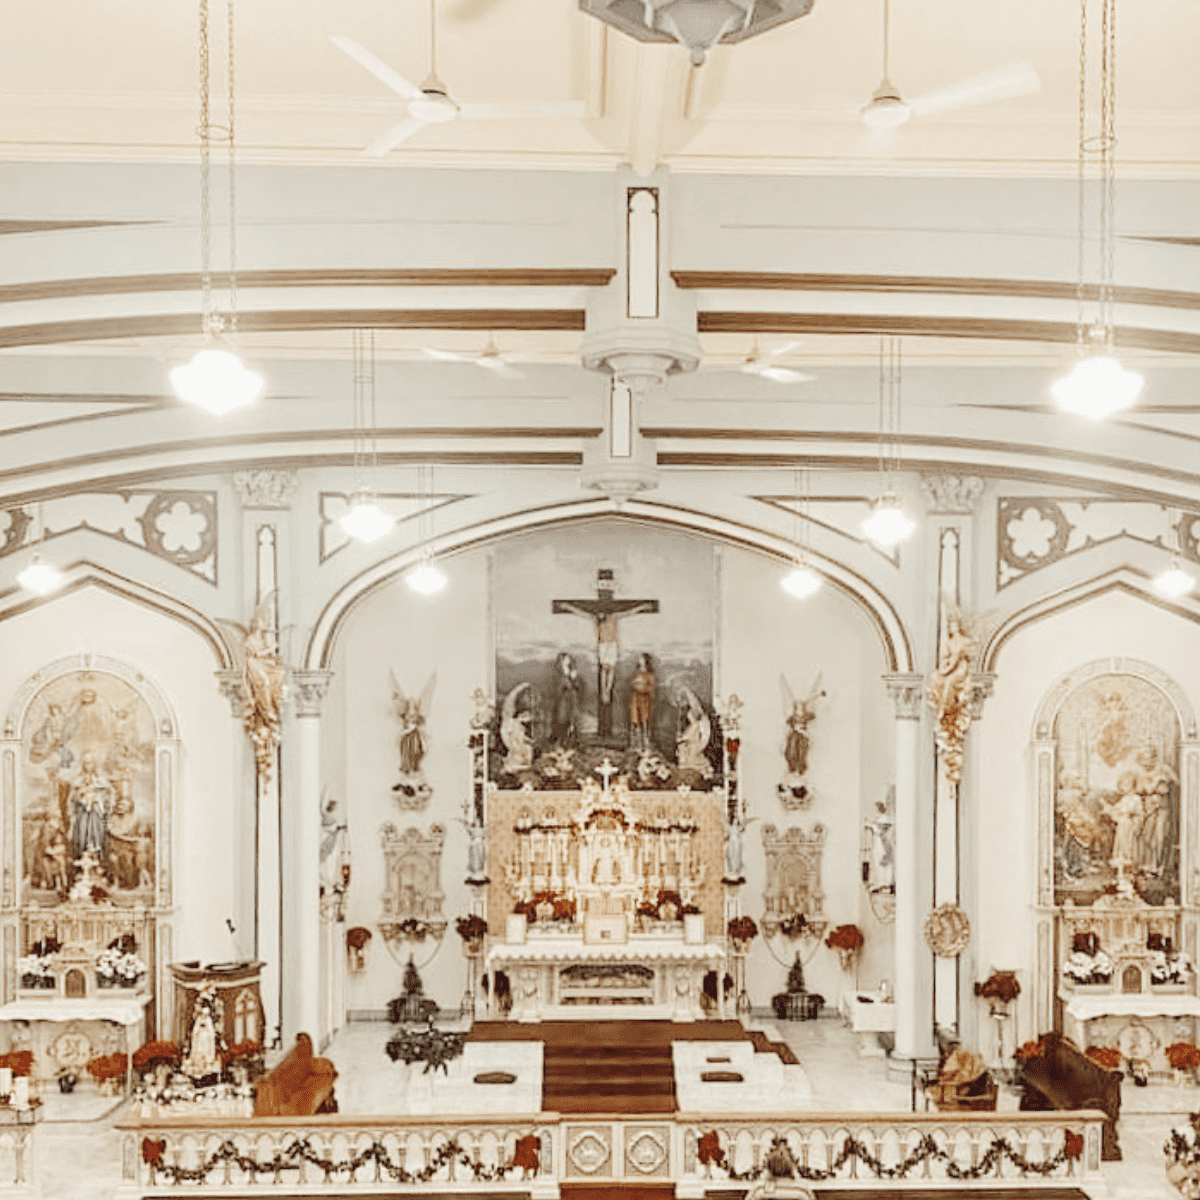 view of the main altar and side altars of Catholic Church